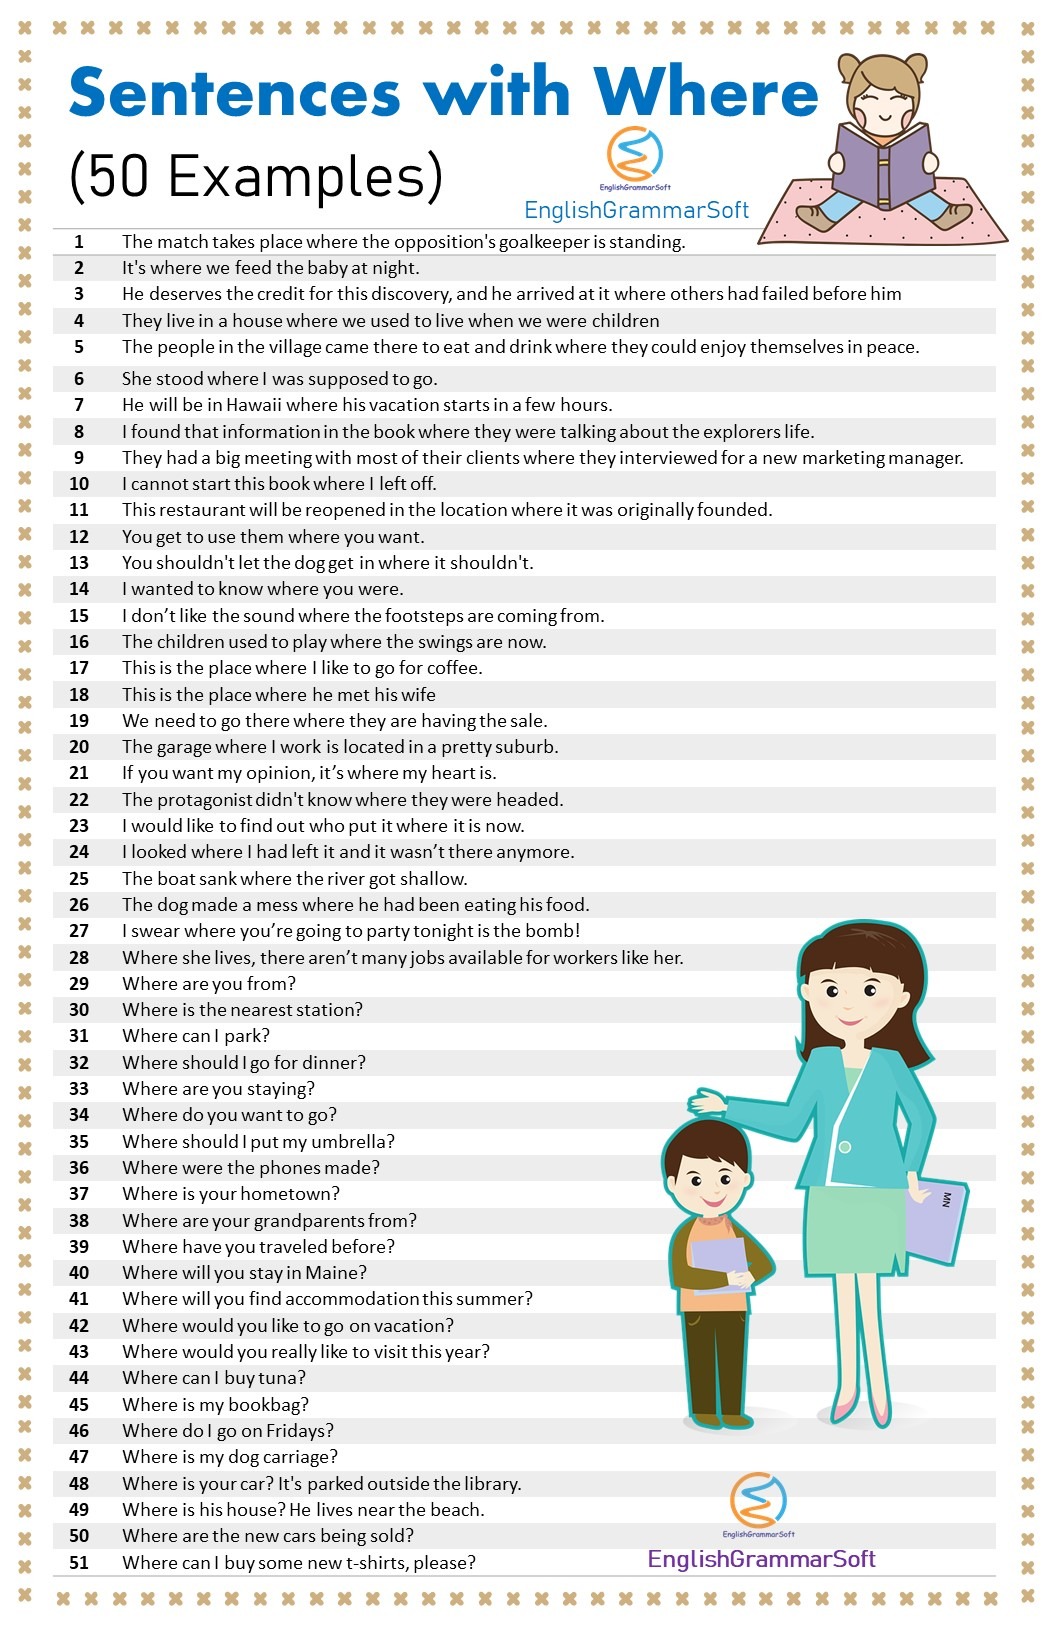 Sentences with Where (50 Examples)